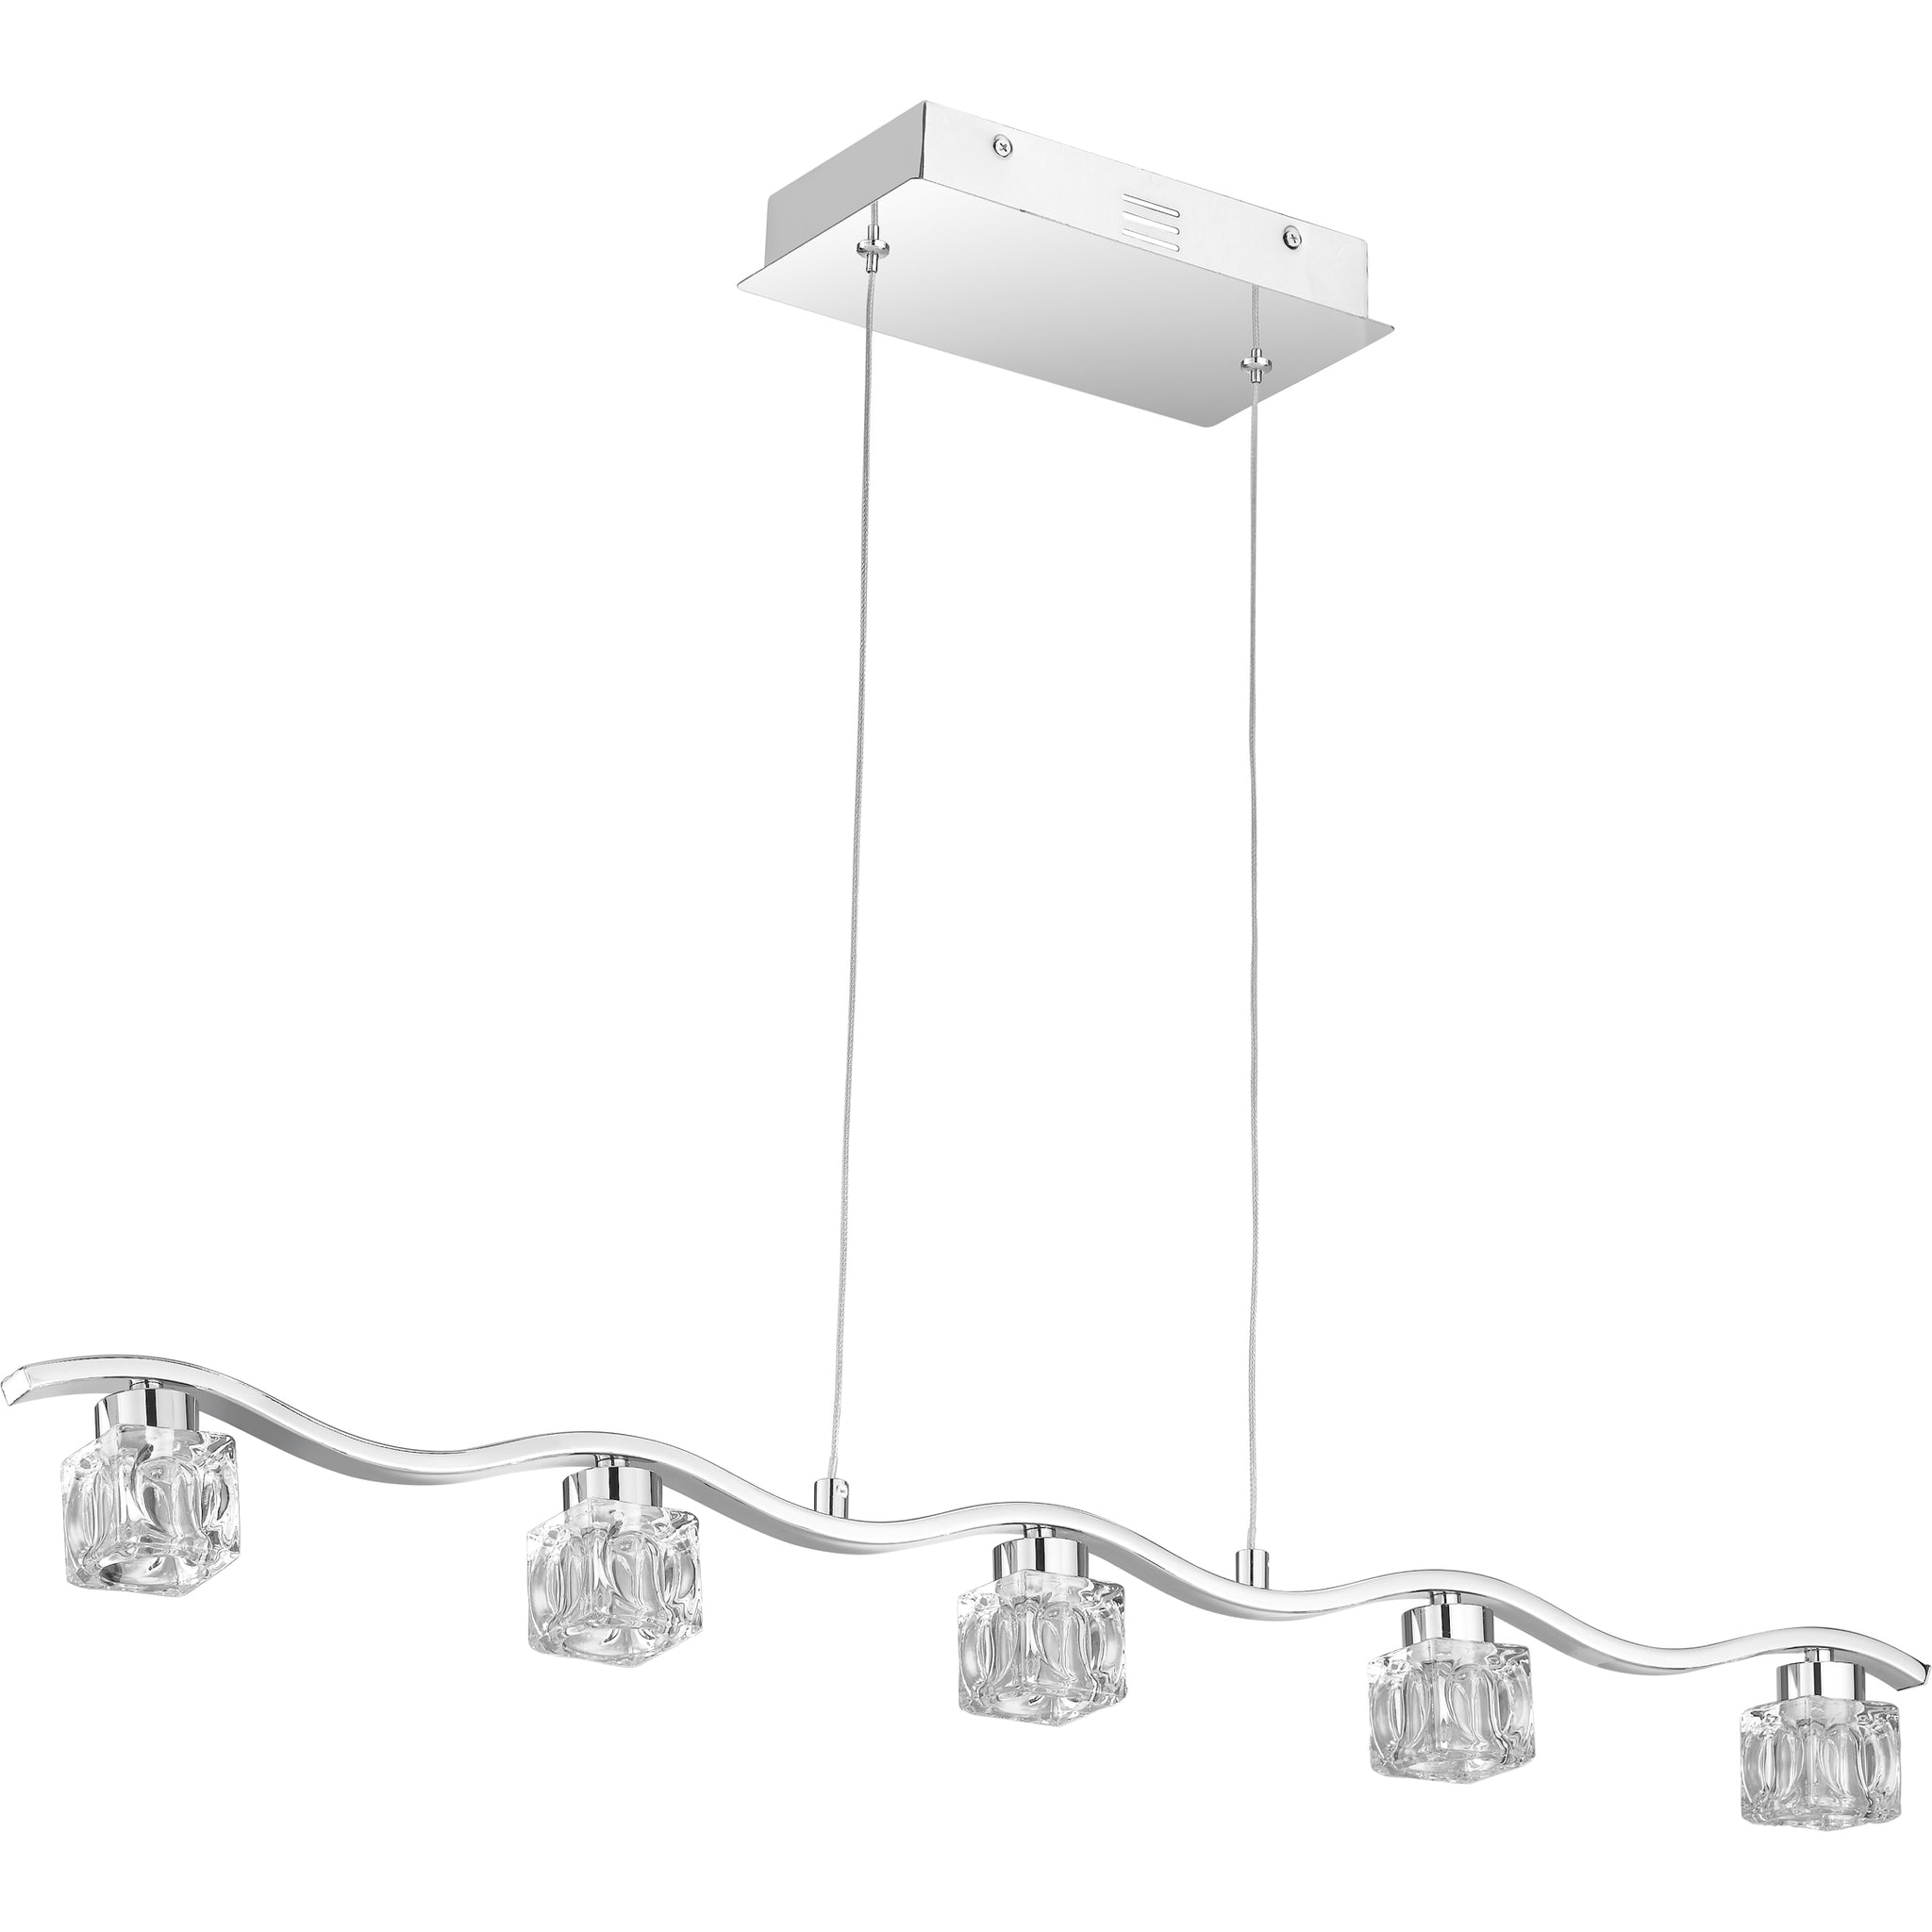 Clear Hollow Linear Suspension Polished Chrome